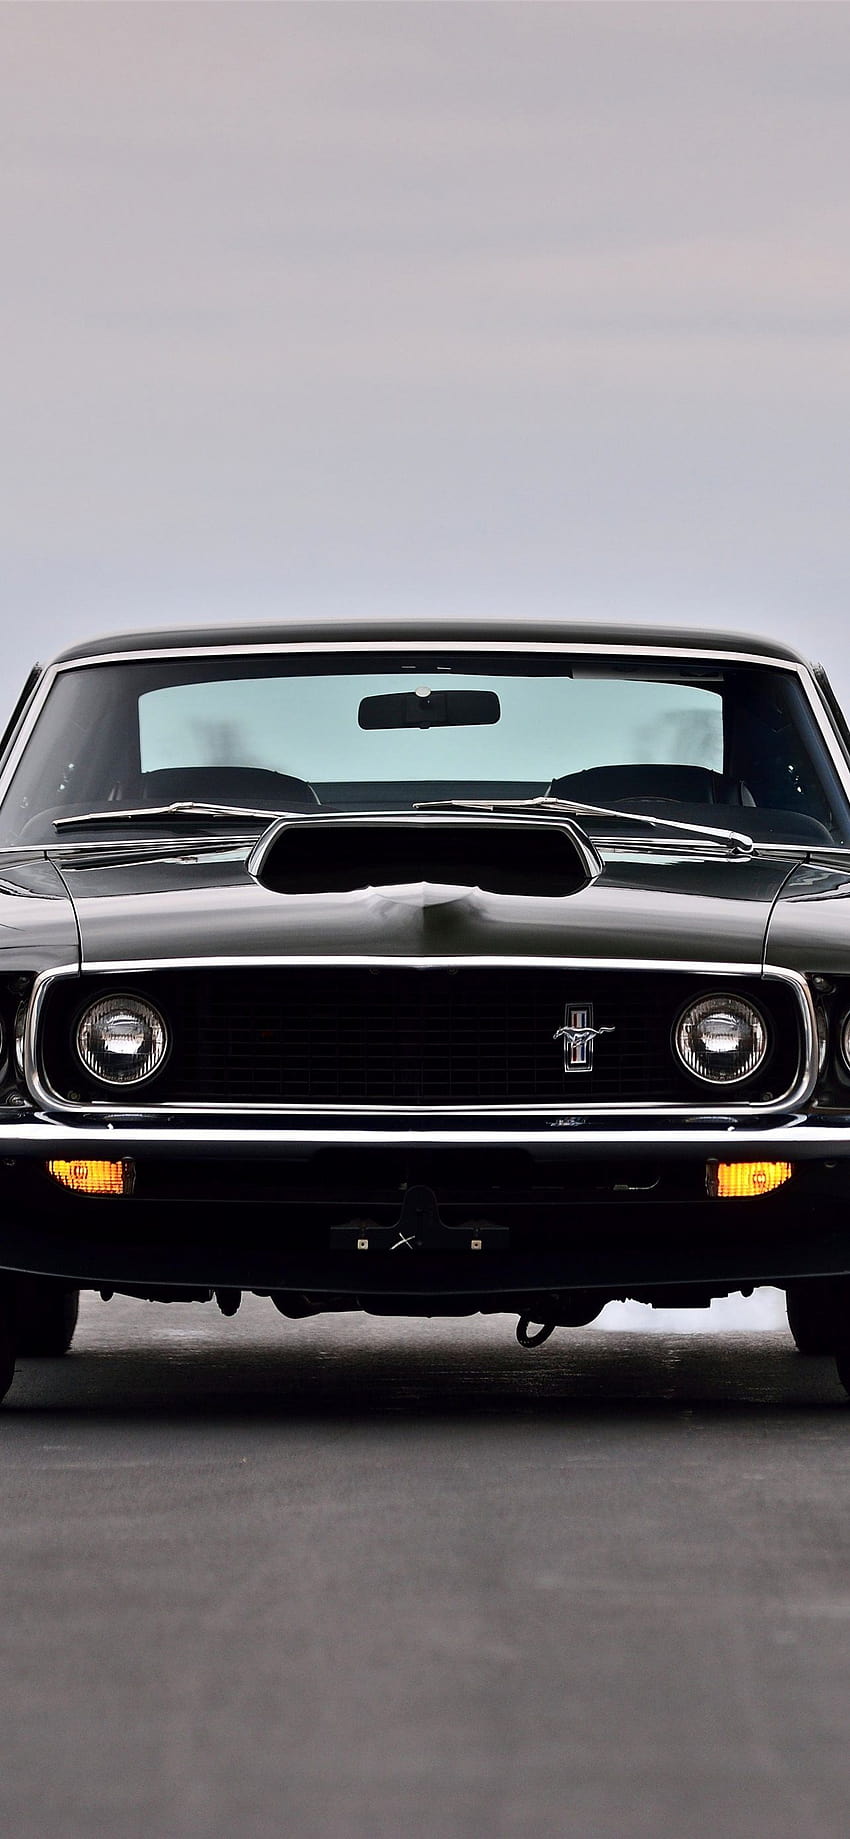 ford mustang boss 429 fastback 1969 muscle car 4к... iPhone, iphone classic muscle car HD phone wallpaper